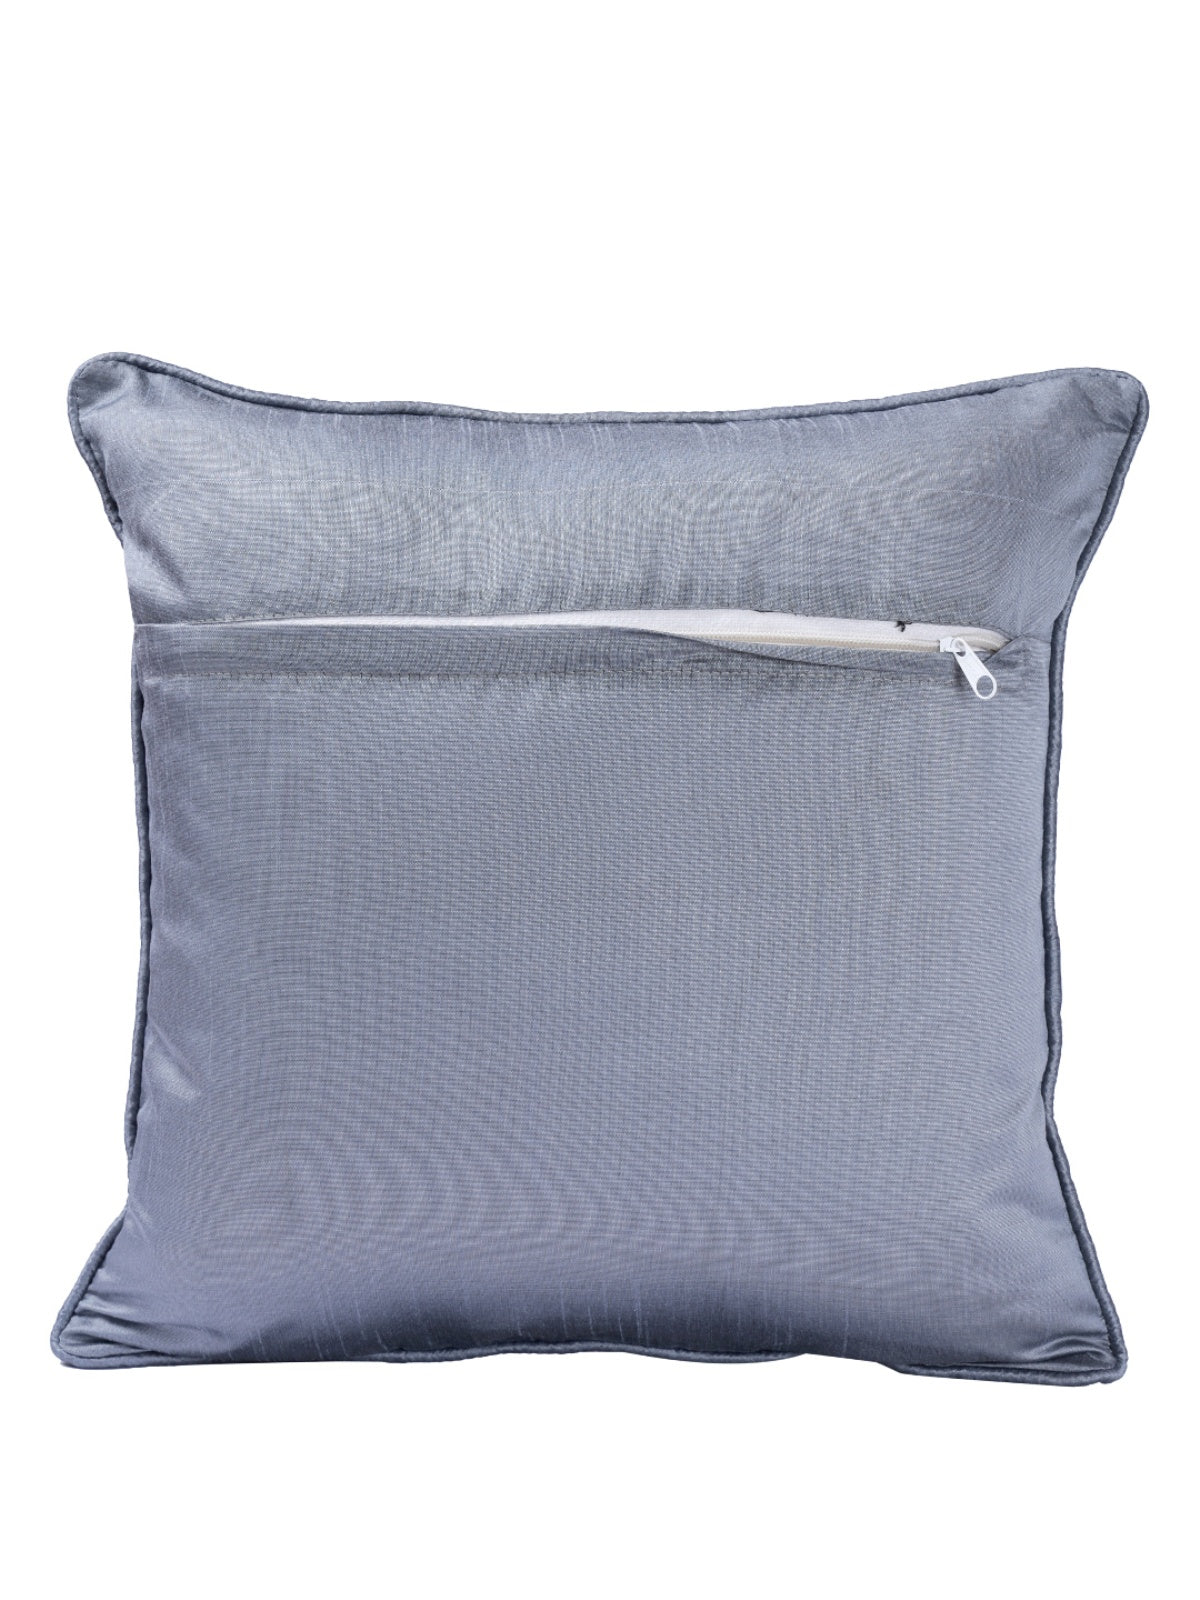 Silver Set of 5 Cushion Covers